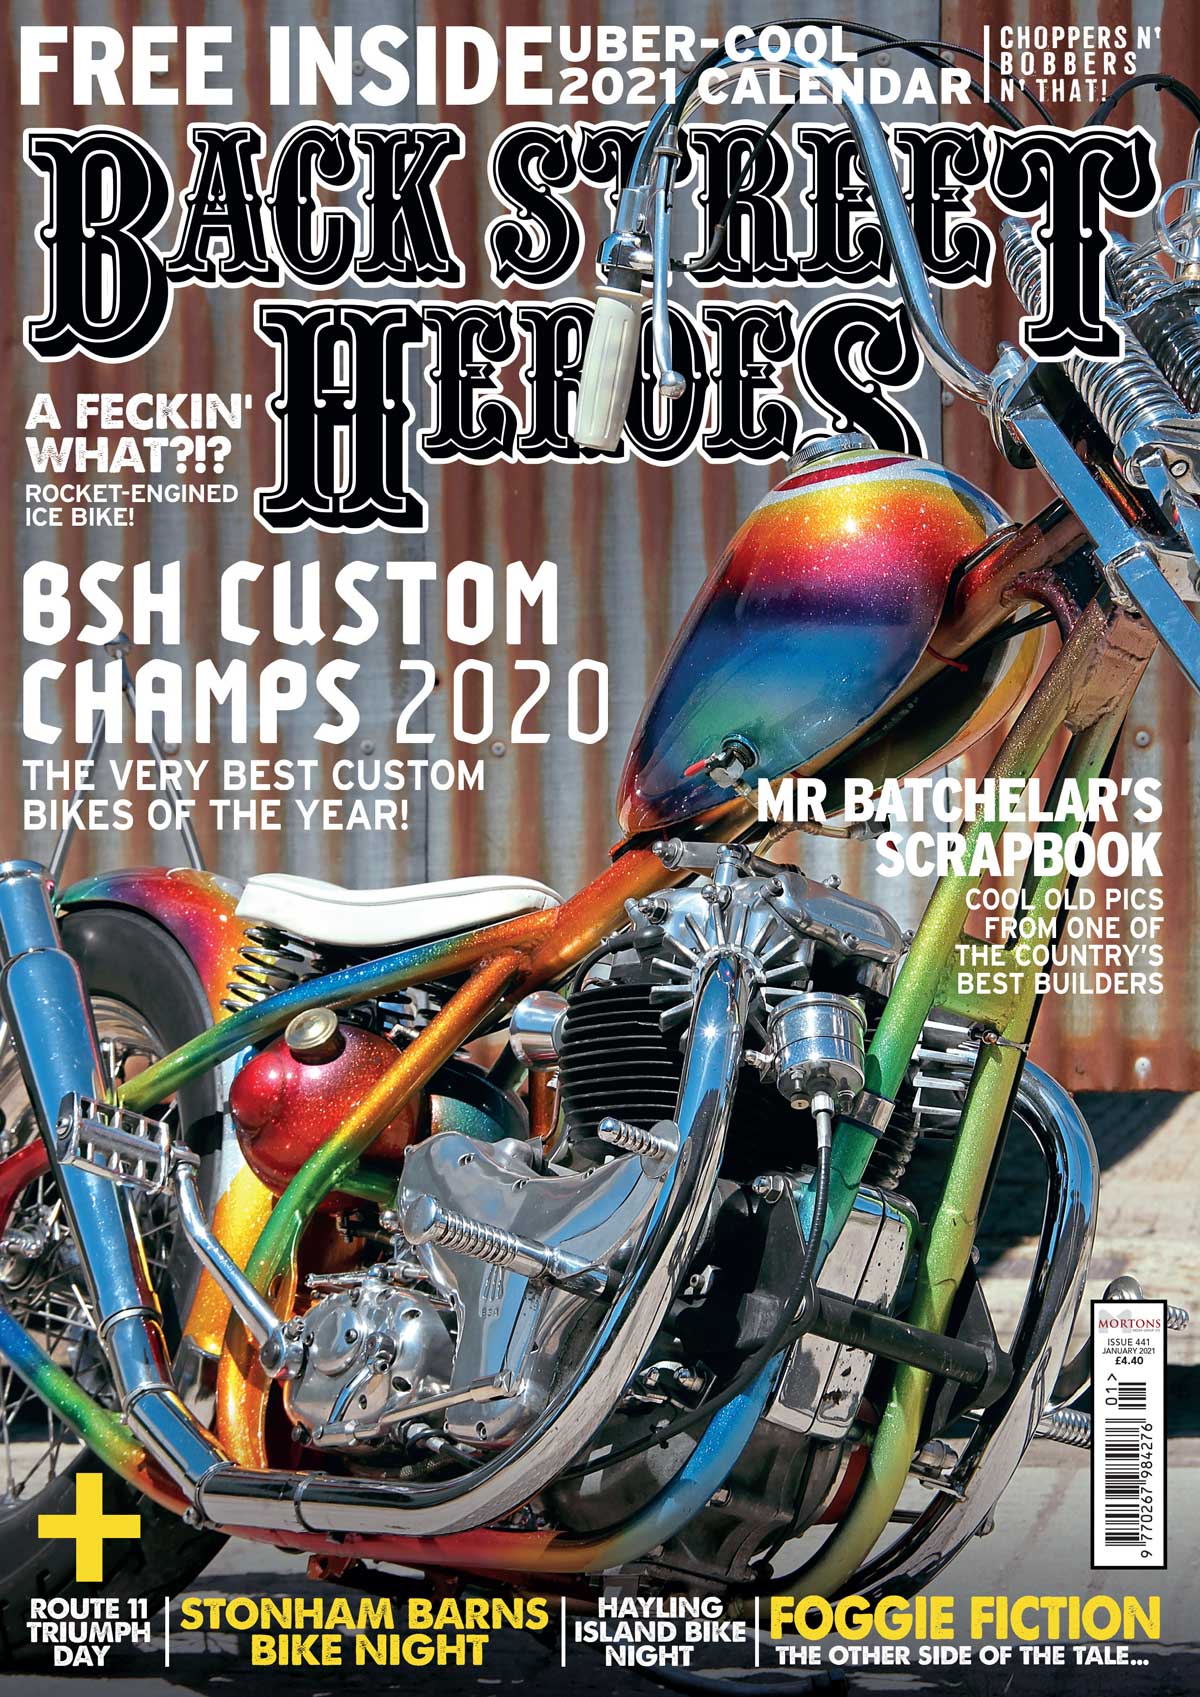 PREVIEW: January issue of Back Street Heroes magazine